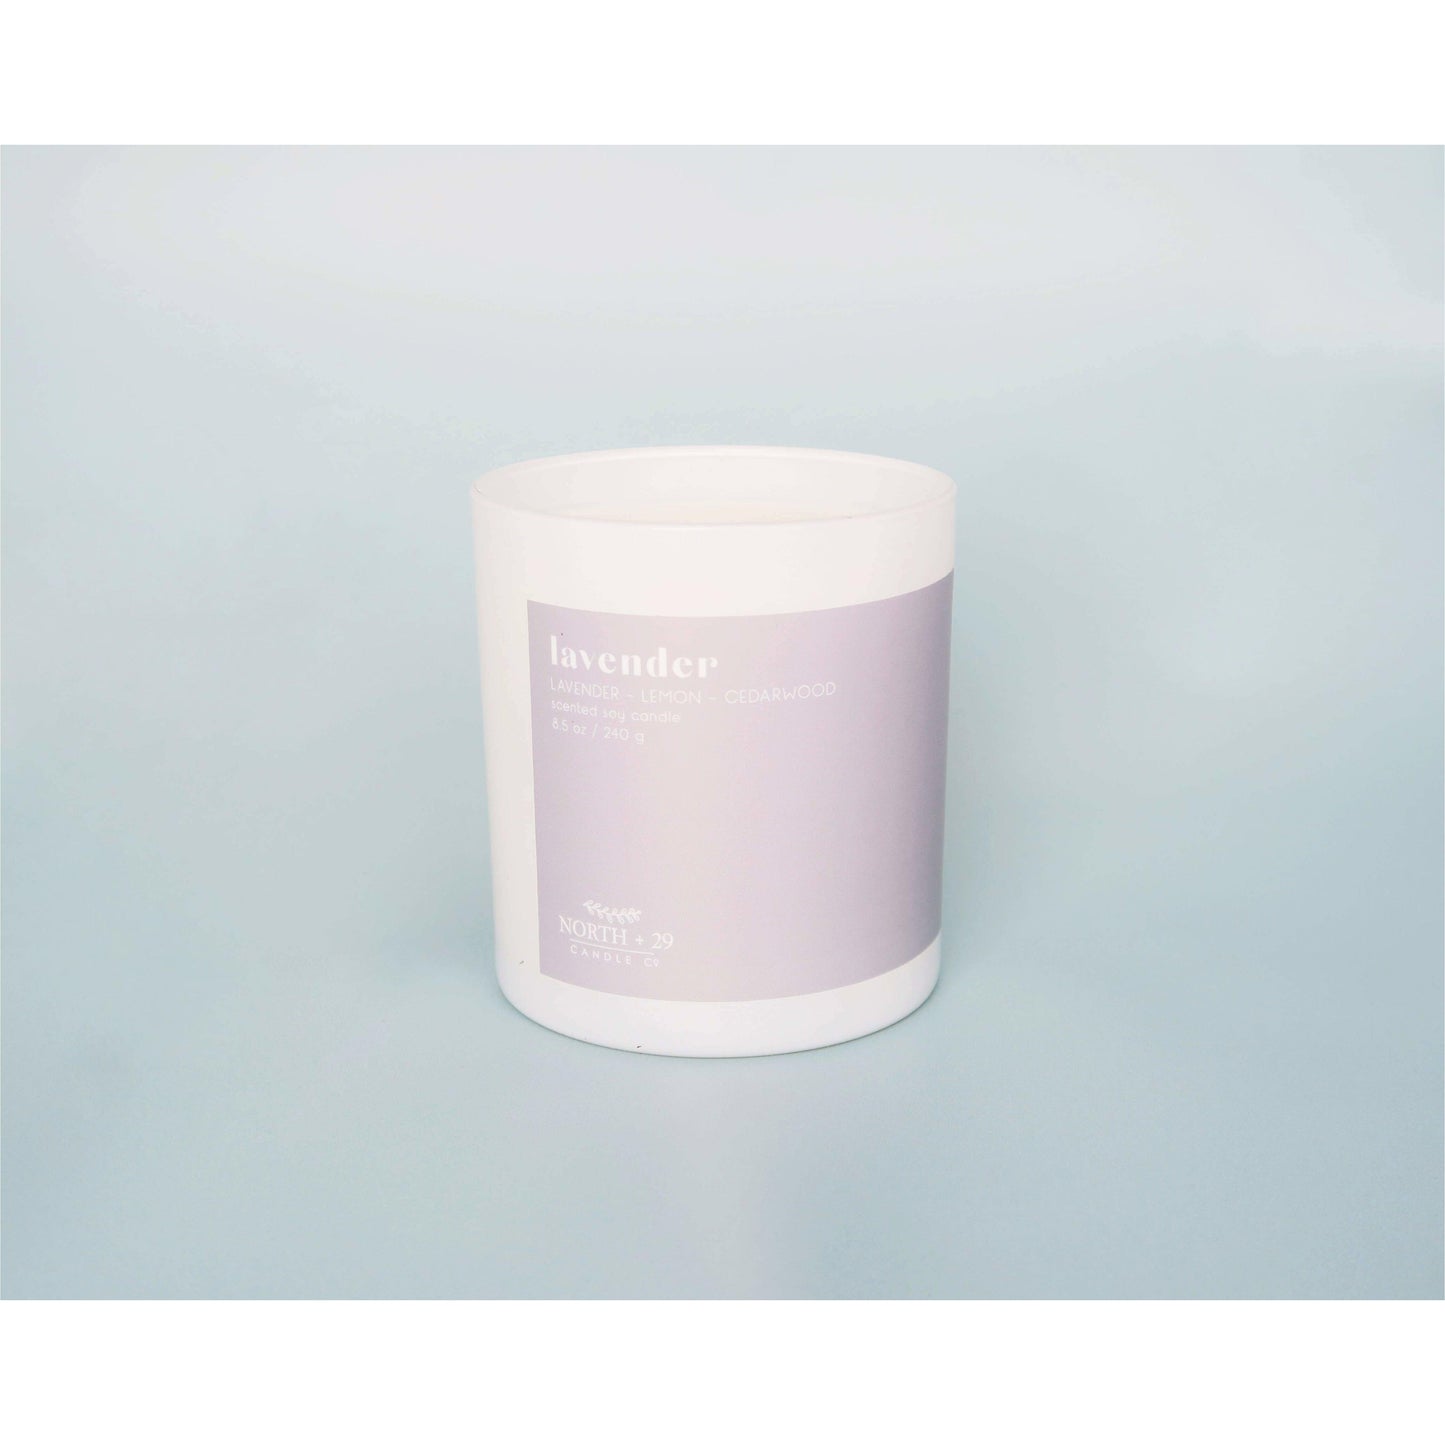 North + 29 Lavender Soy Candle